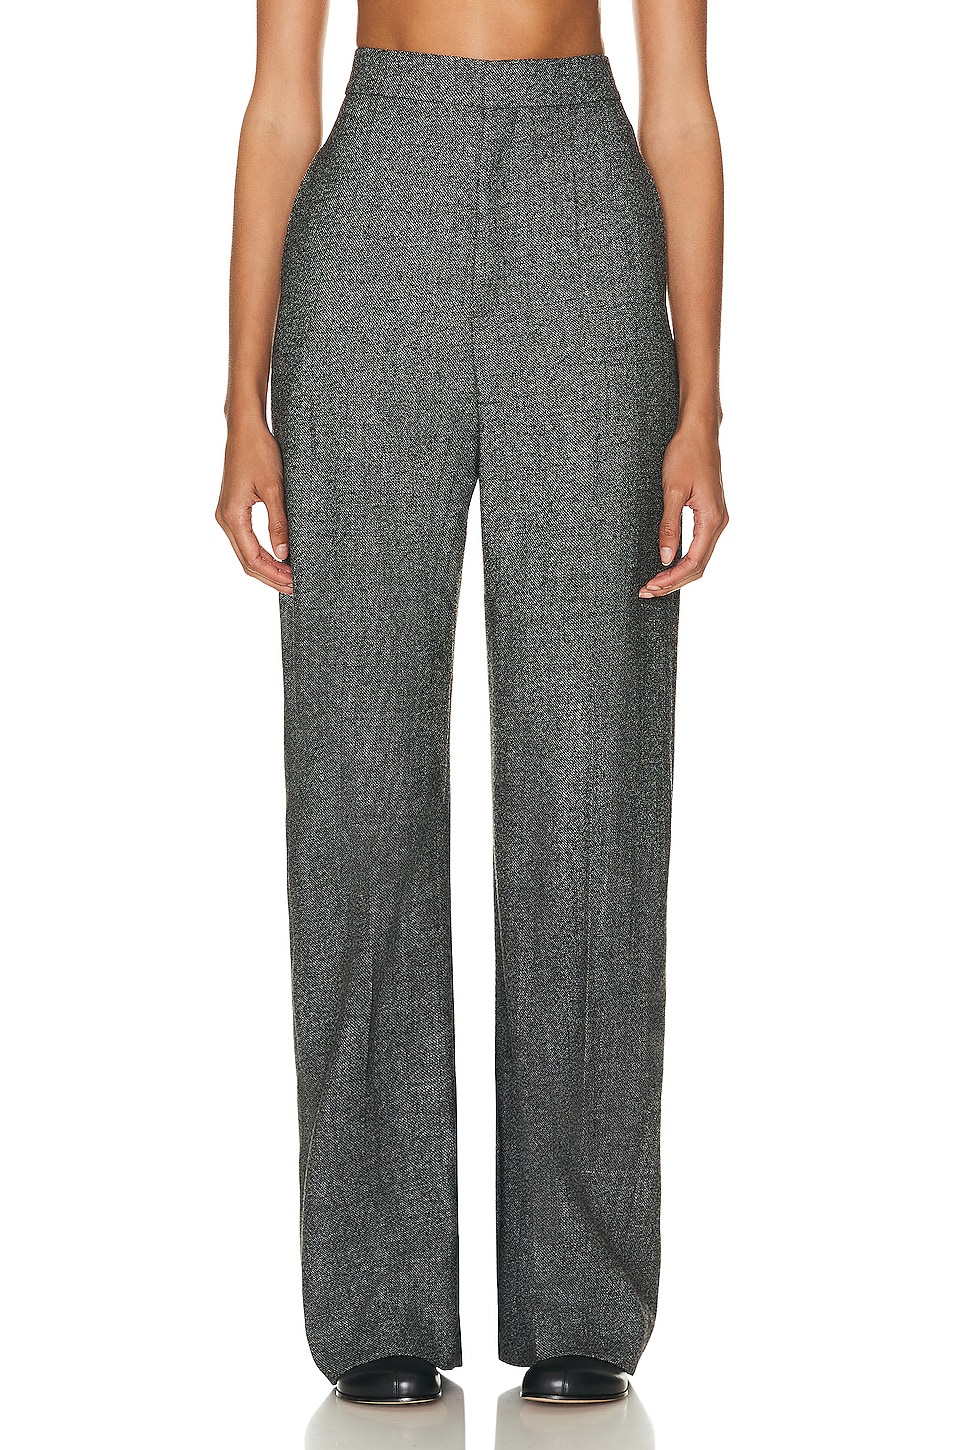 Image 1 of Loewe High Waisted Trouser in Black & White